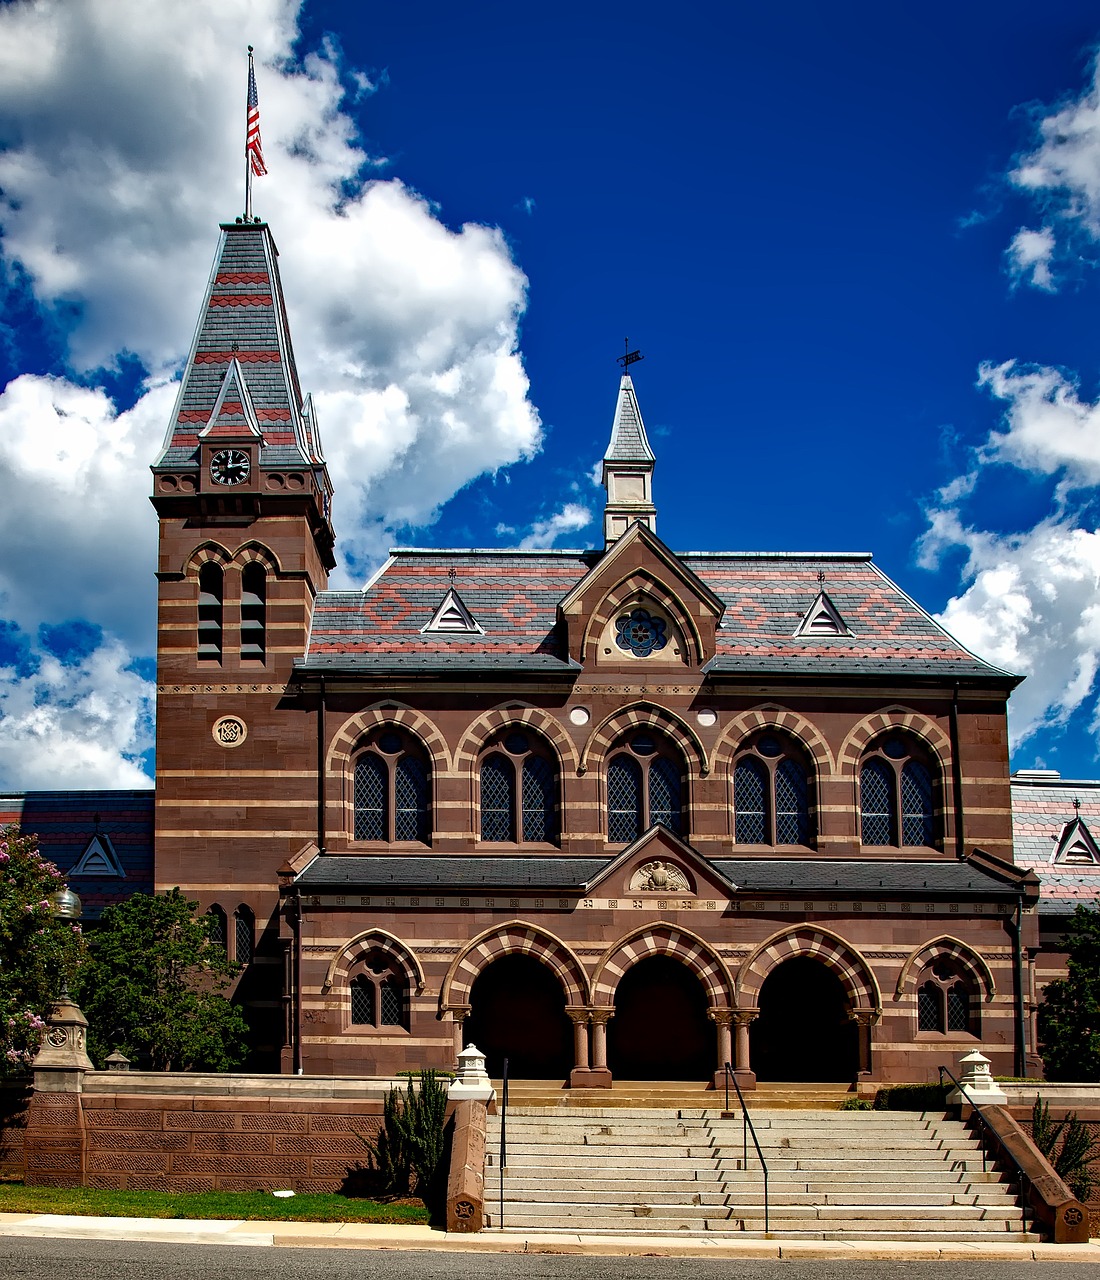 Image of Gallaudet University's iconic Chapel Hall - a red brick and stone building with arches and a clock tower.